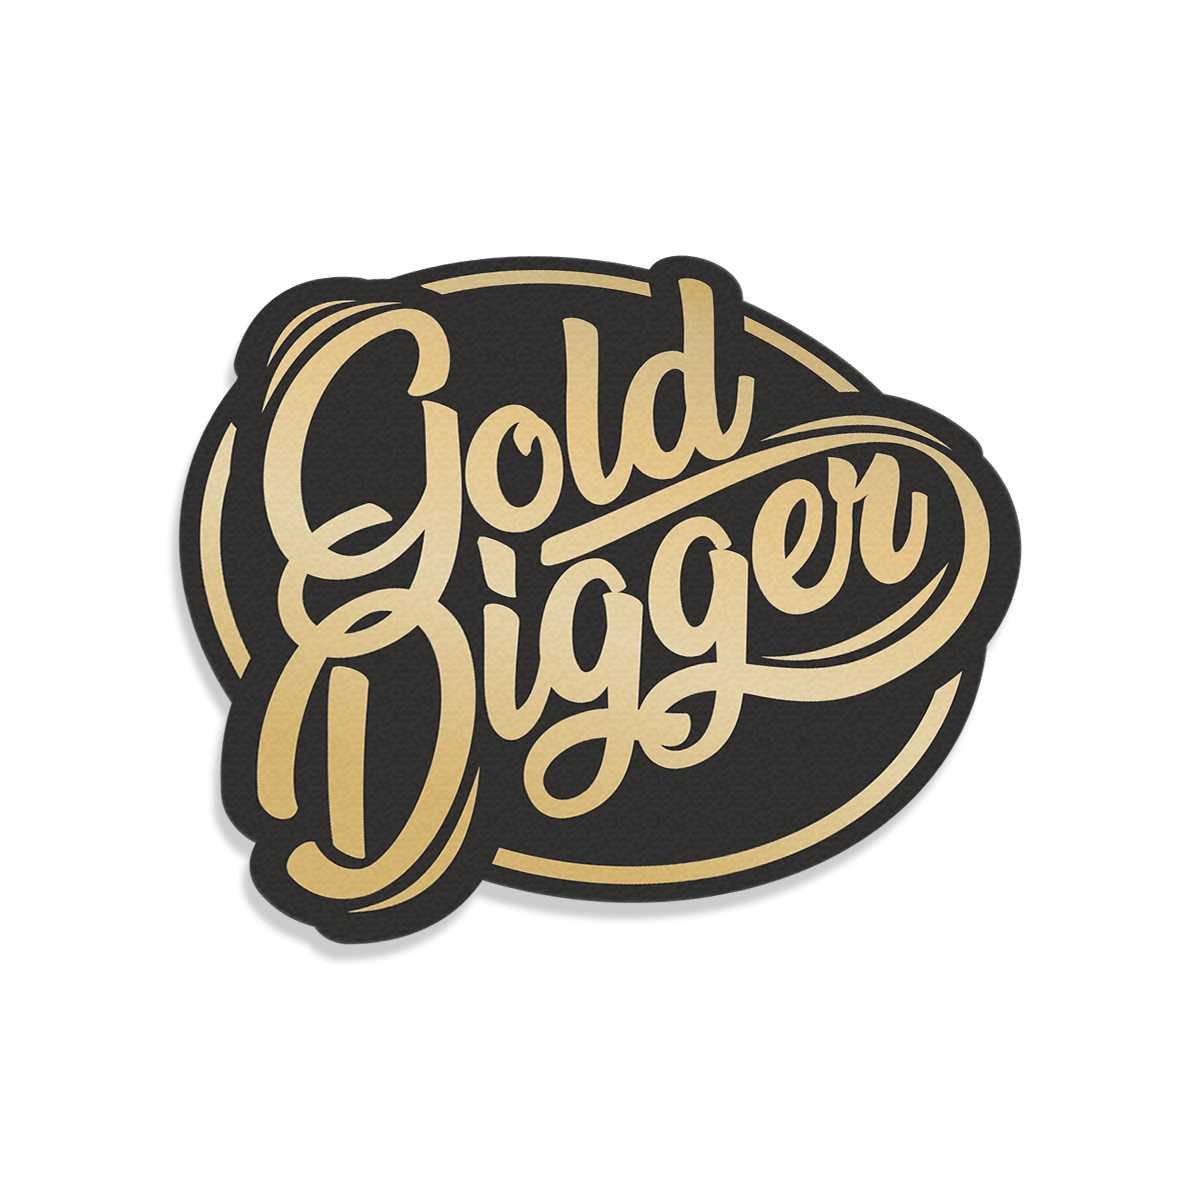 She is a gold digger Sticker for Sale by falcox904